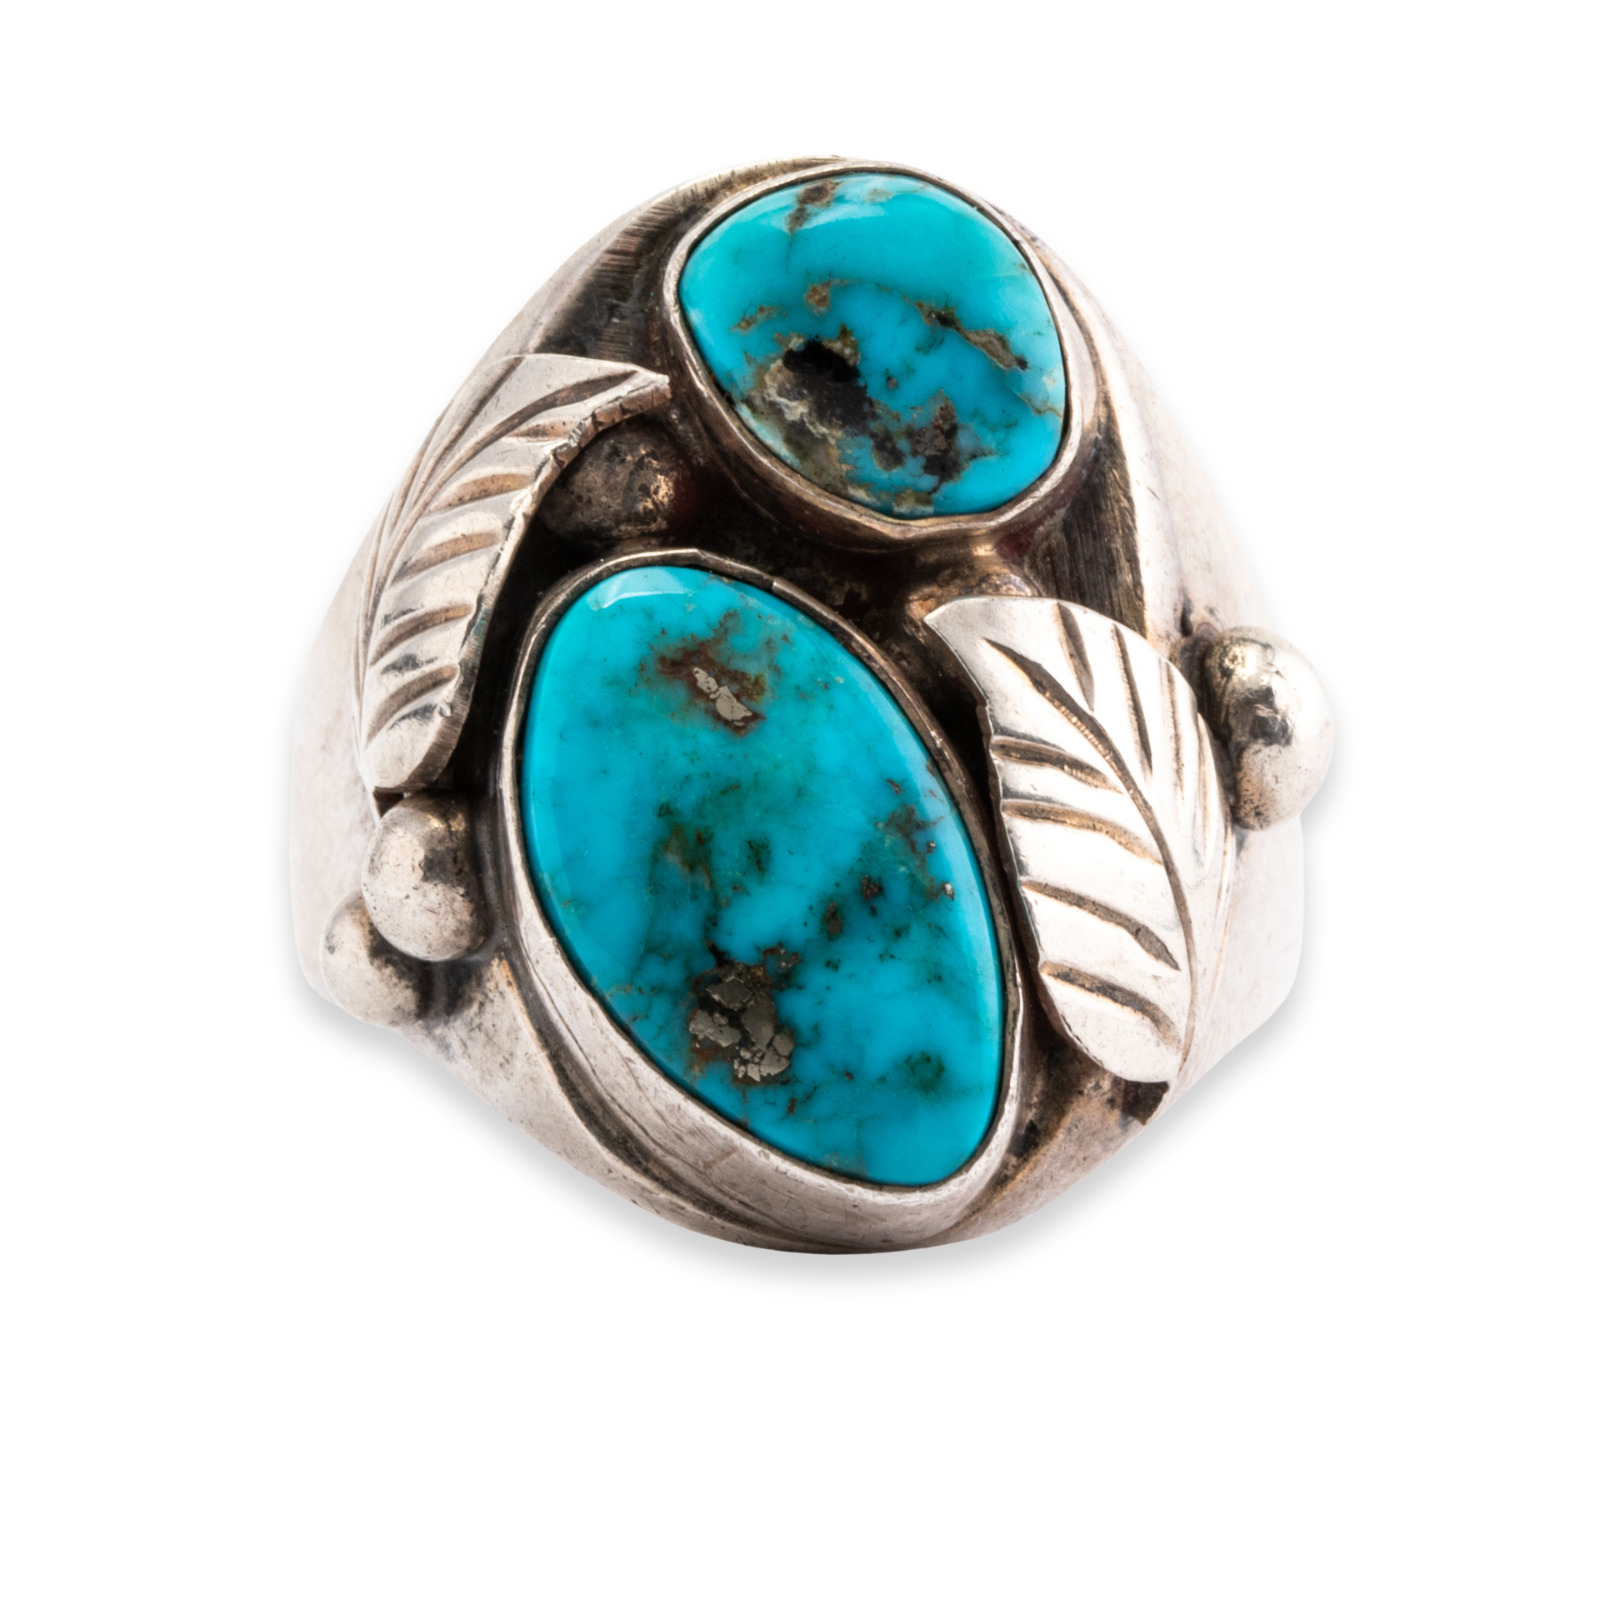 LARGE NATIVE AMERICAN STERLING SILVER PYRITE TURQUOISE TWO STONE LEAF RING 11.5